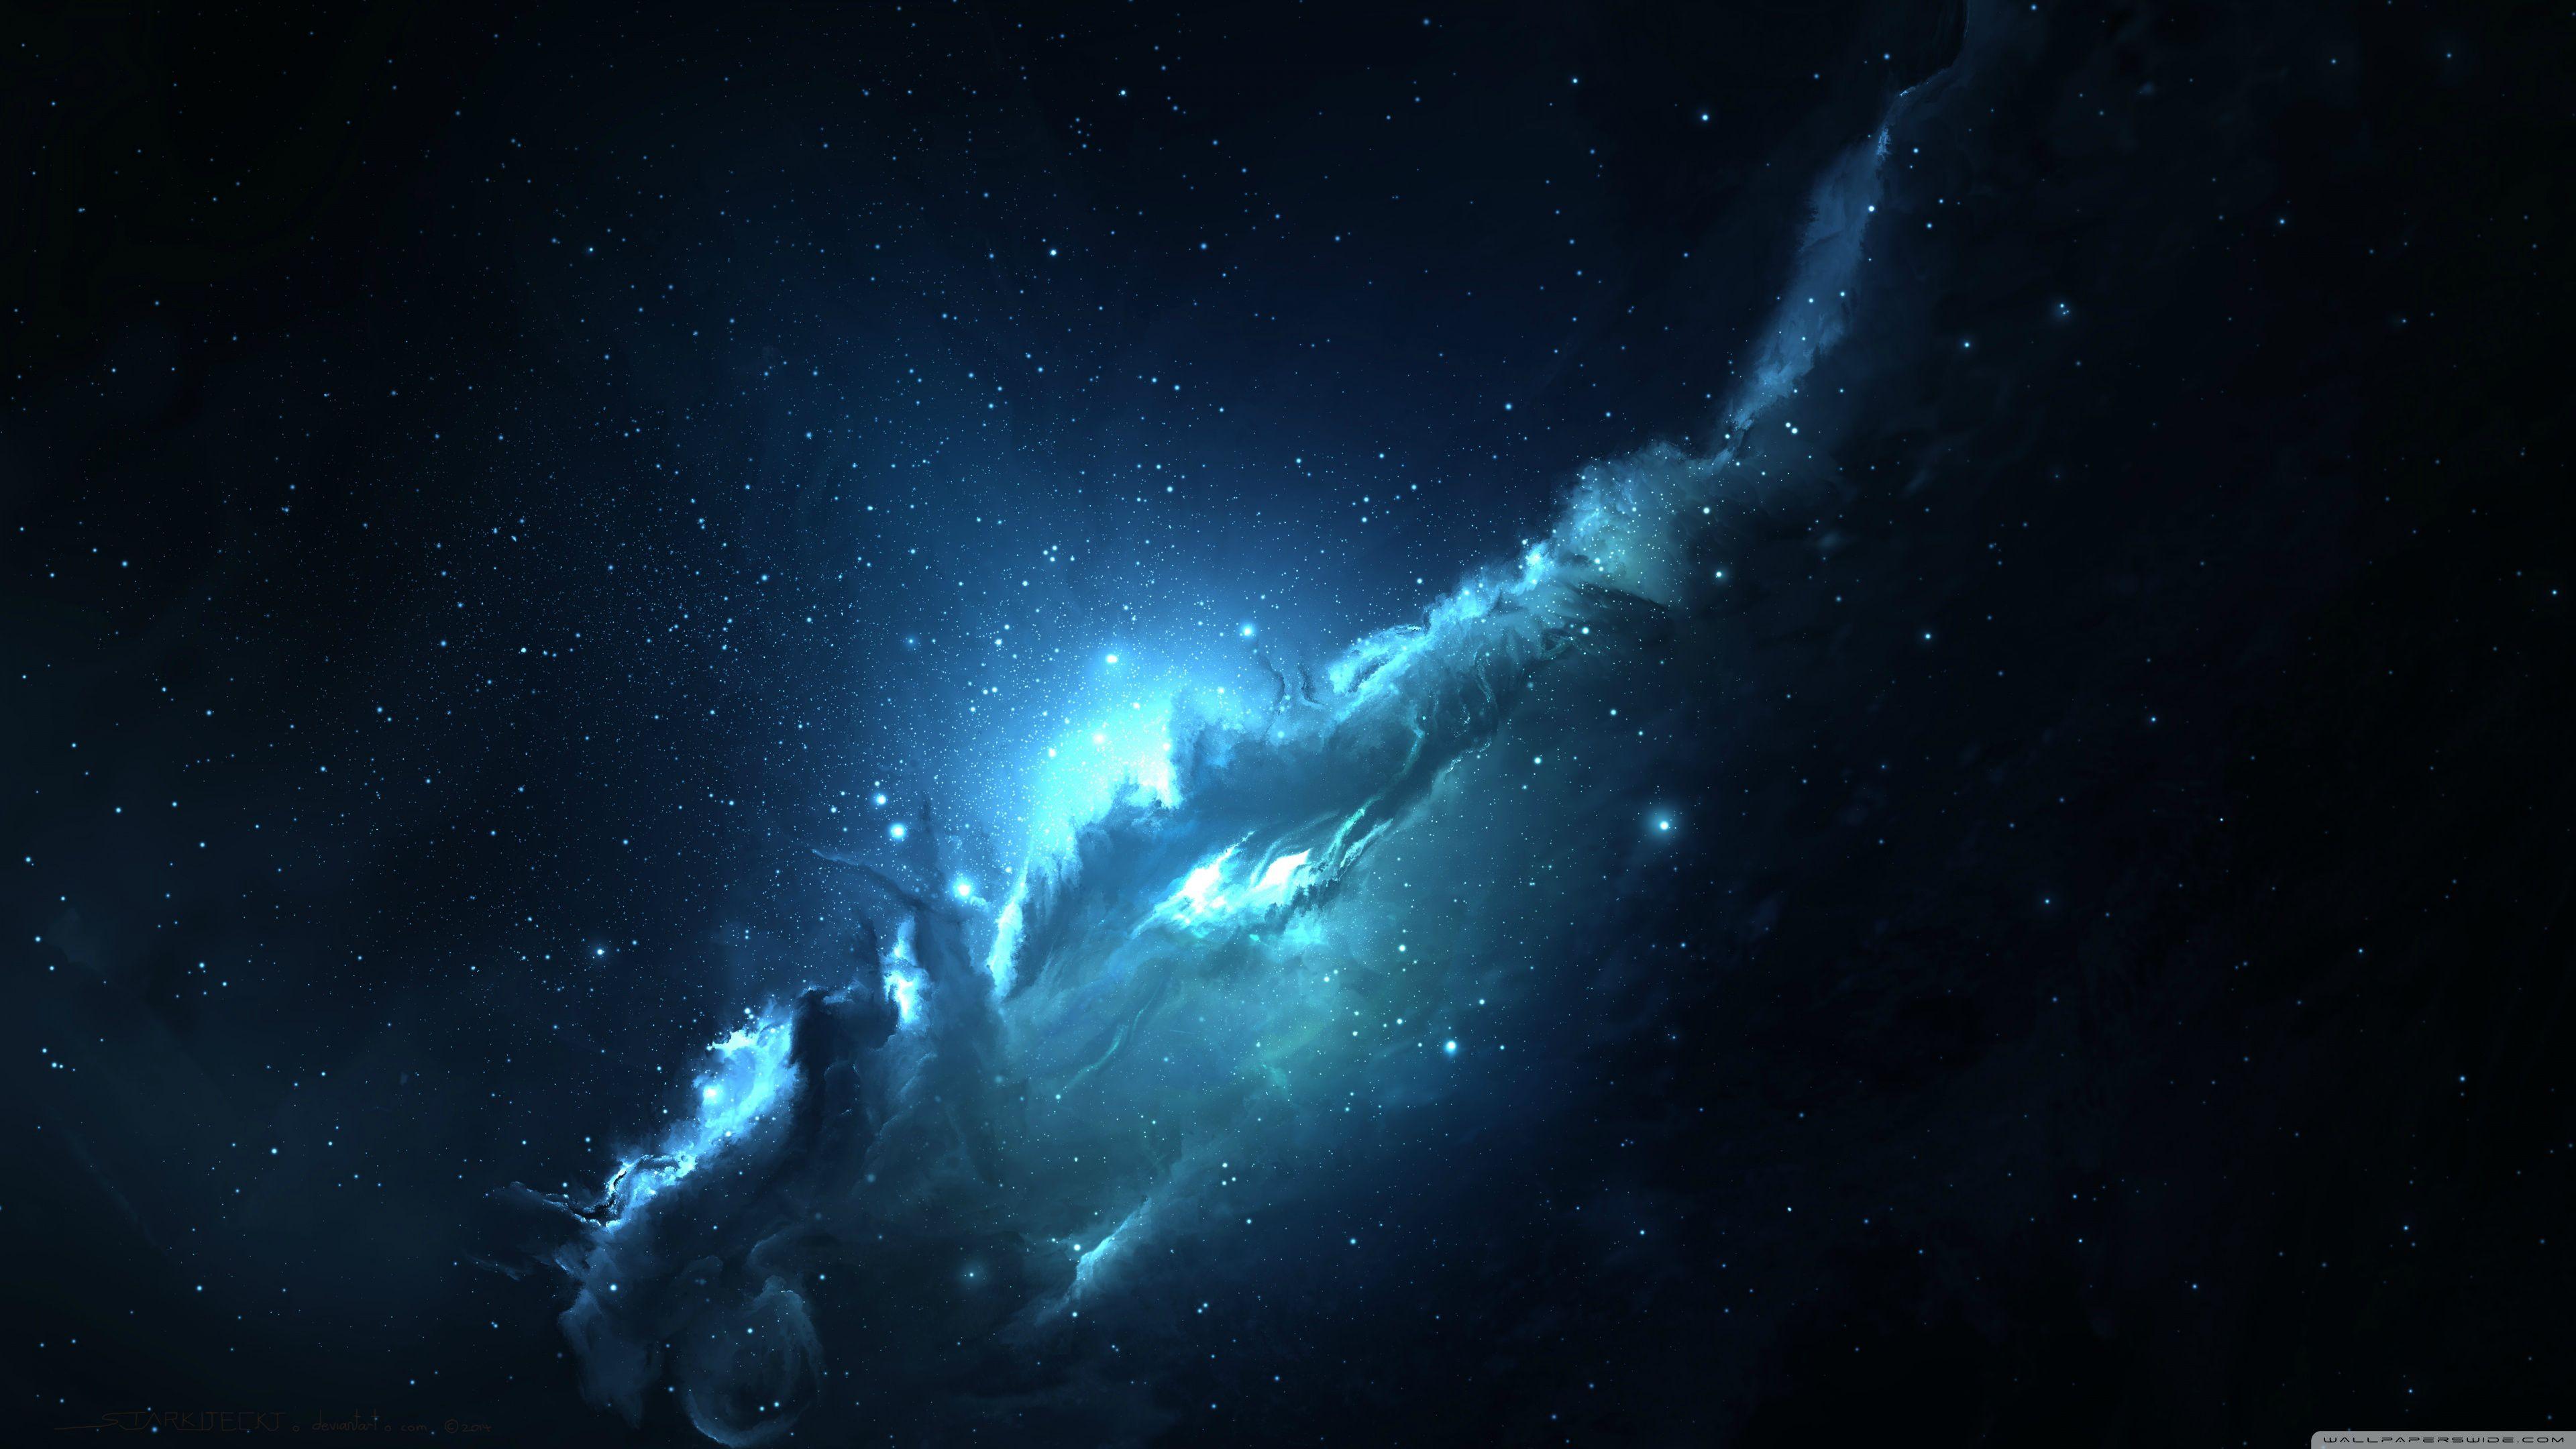 4k Space Wallpaper (Skip if you are using limited data!)